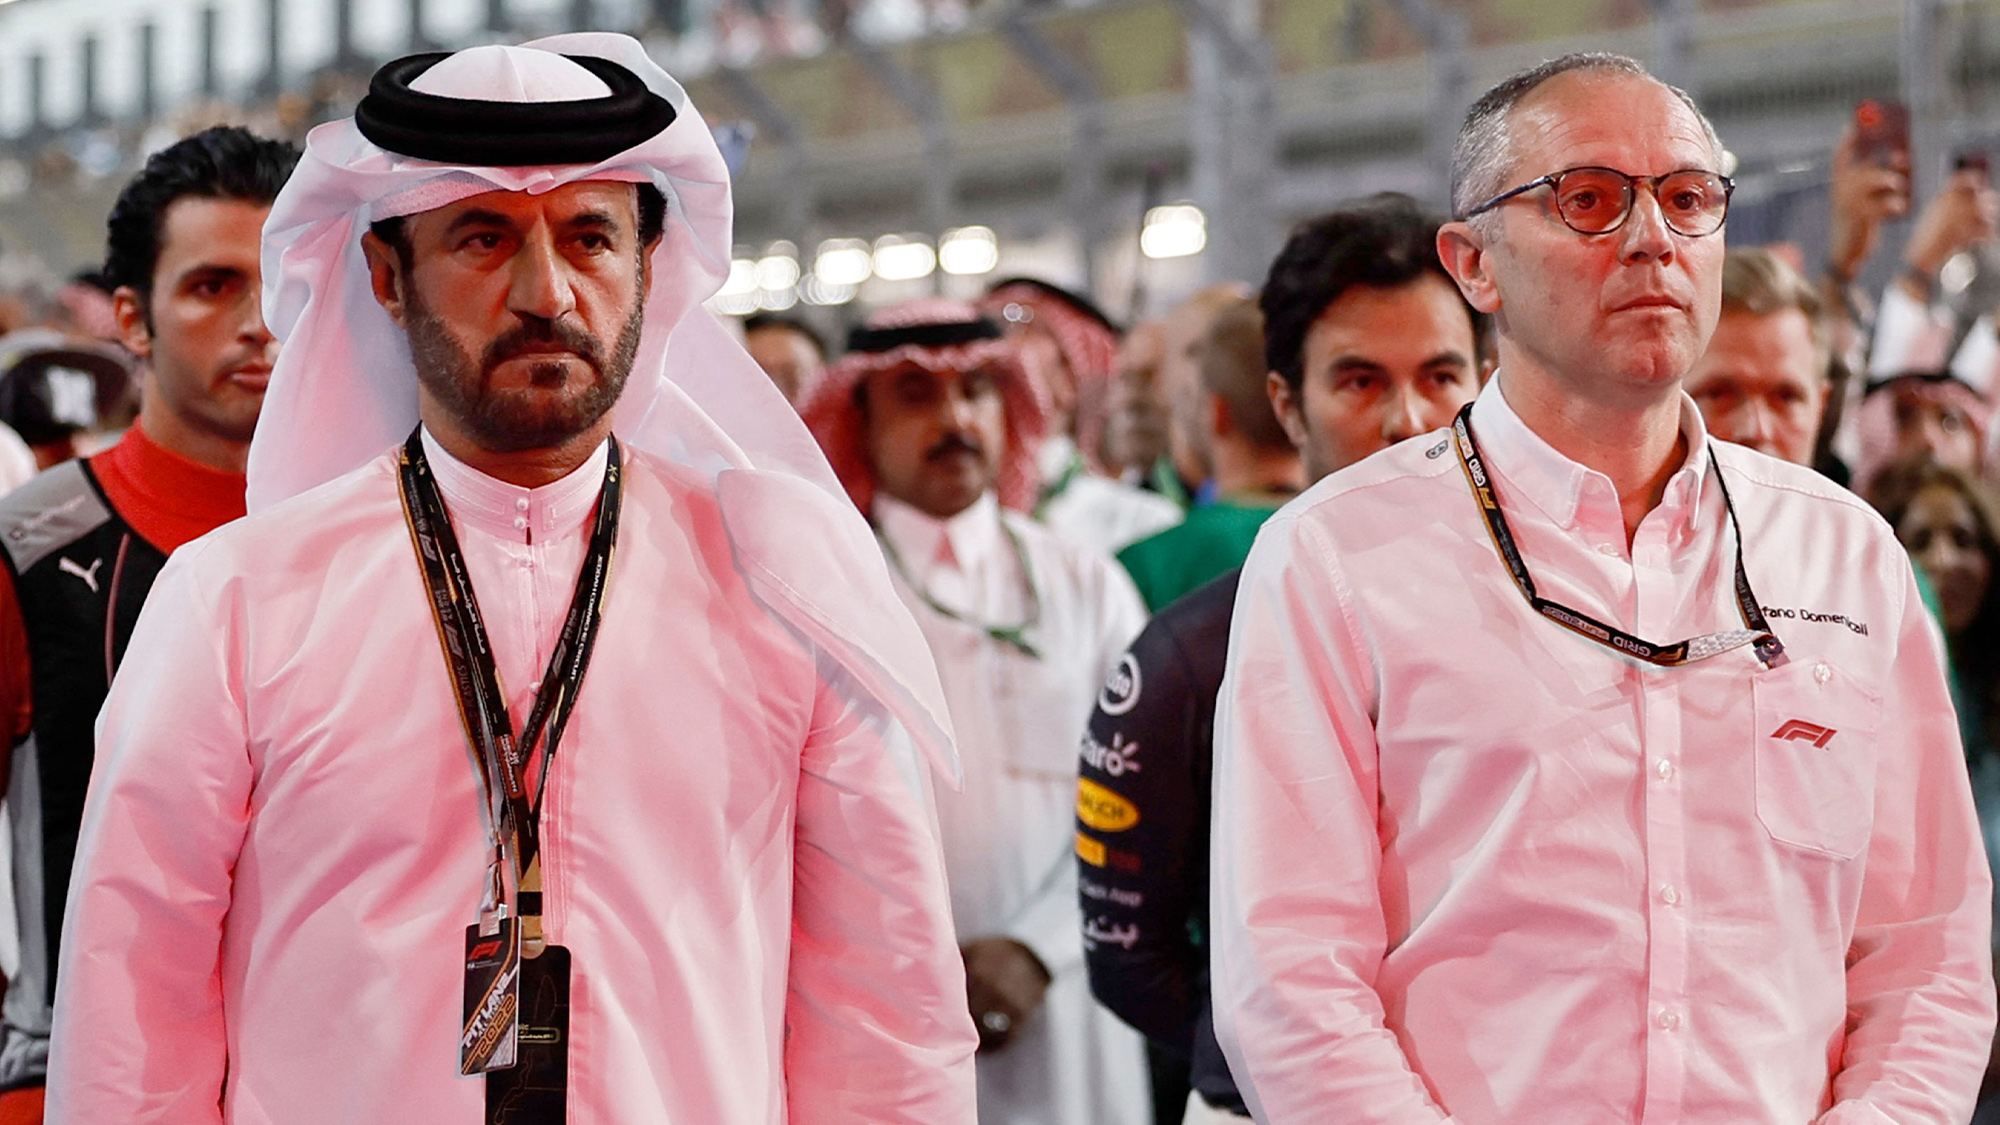 Ceasefire Declared: F1 Management and FIA Call an End to Internal Struggles